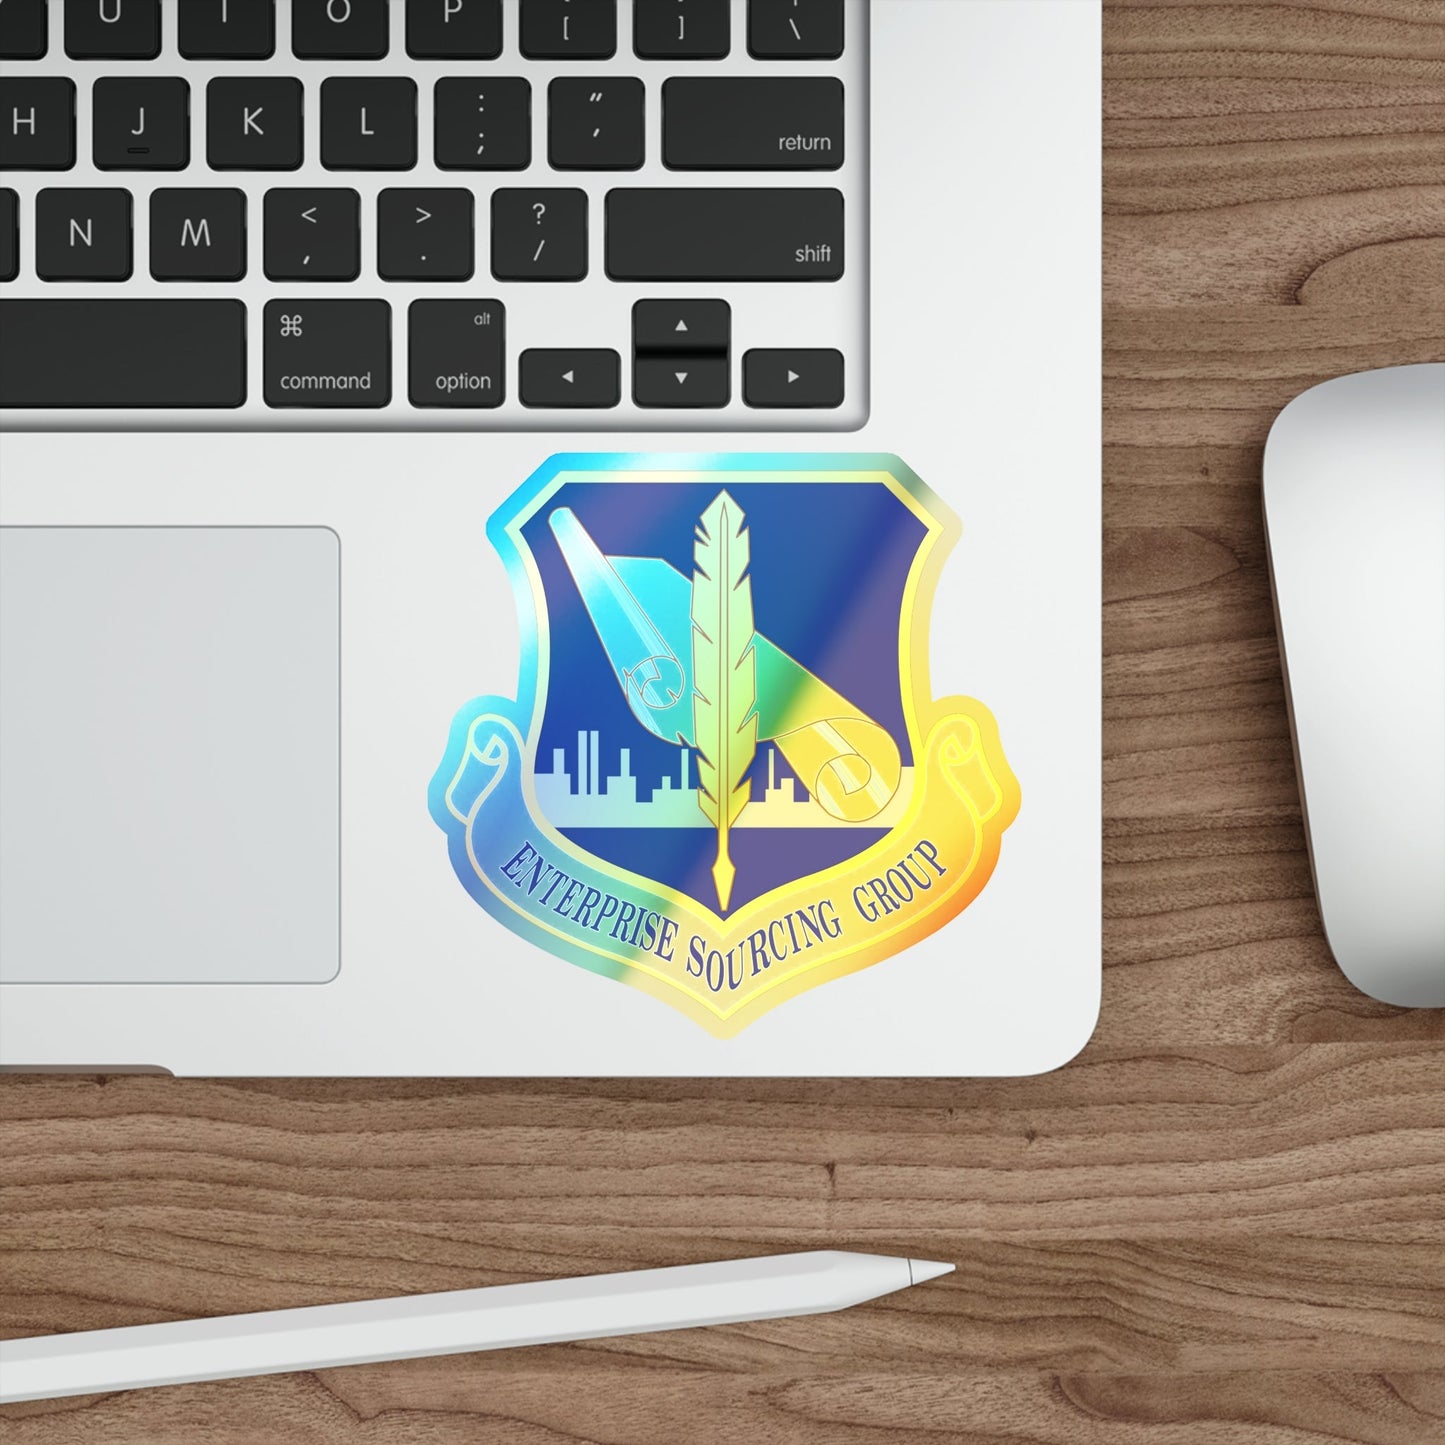 Enterprise Sourcing Group (U.S. Air Force) Holographic STICKER Die-Cut Vinyl Decal-The Sticker Space